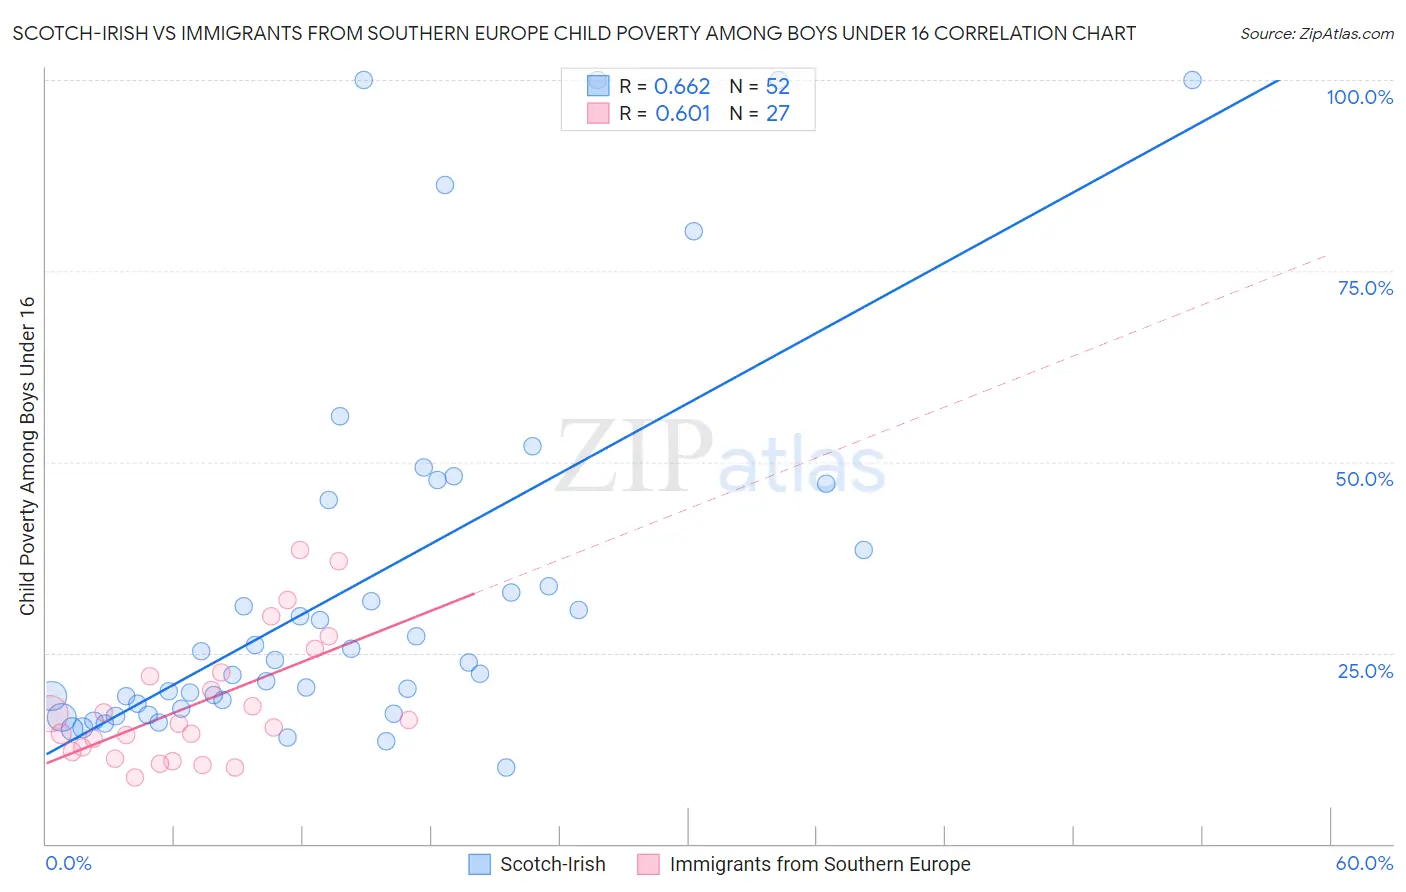 Scotch-Irish vs Immigrants from Southern Europe Child Poverty Among Boys Under 16